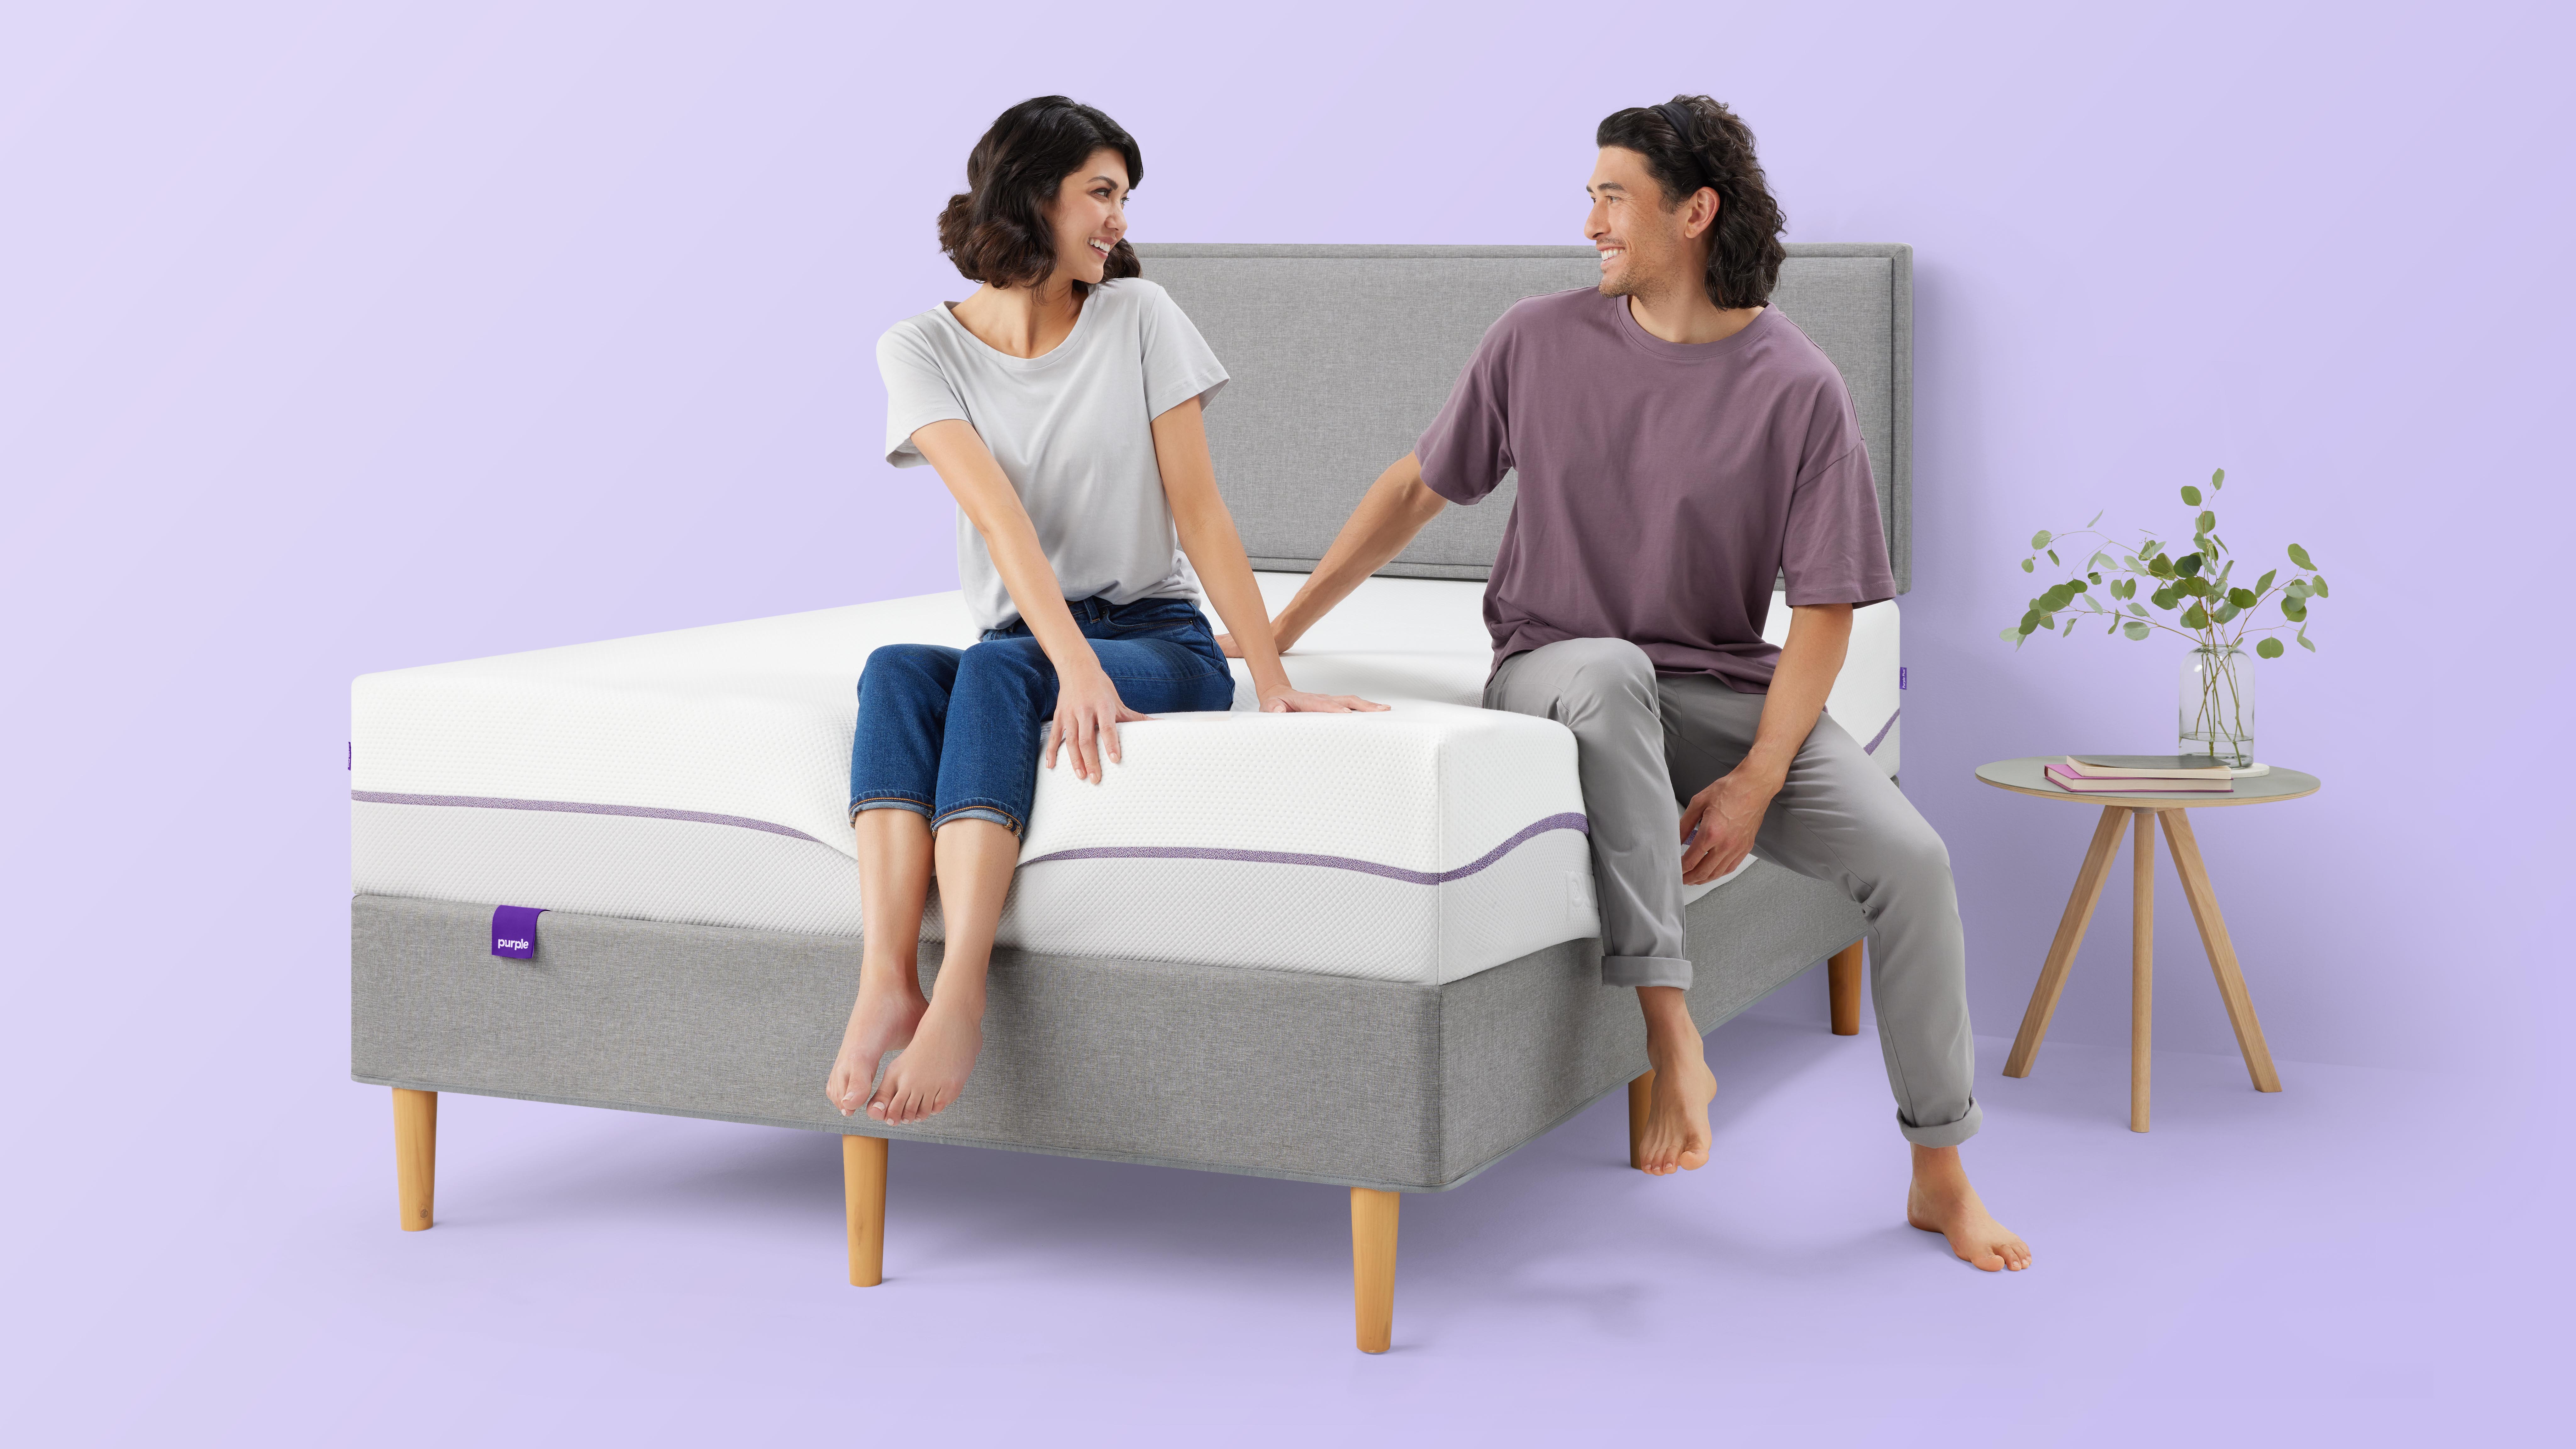 Purple Plus Mattress review: A man and a woman talk and laugh while sat on the edge of the Purple Plus mattress